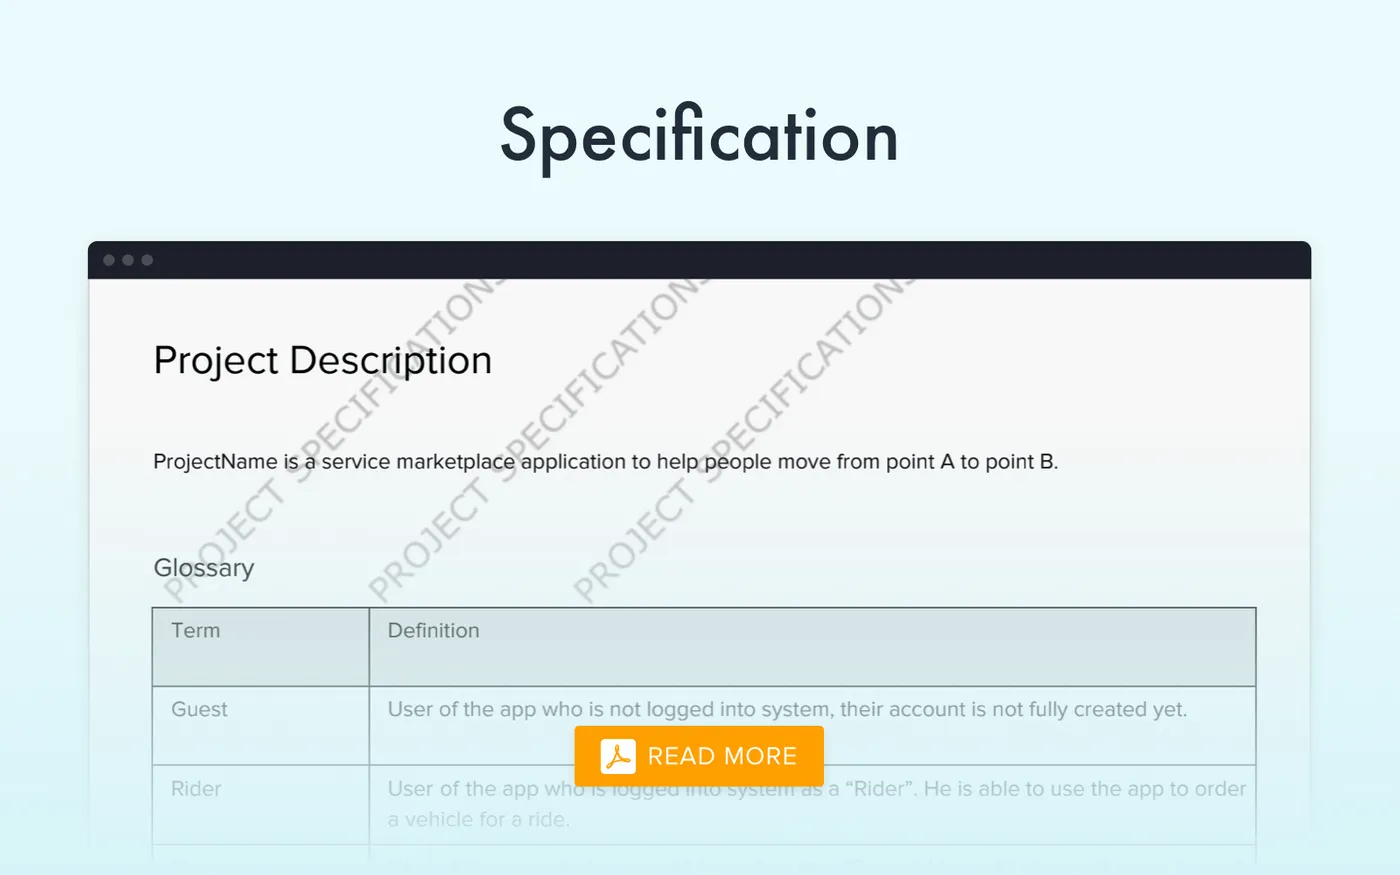 Specification PDF example by Cleveroad